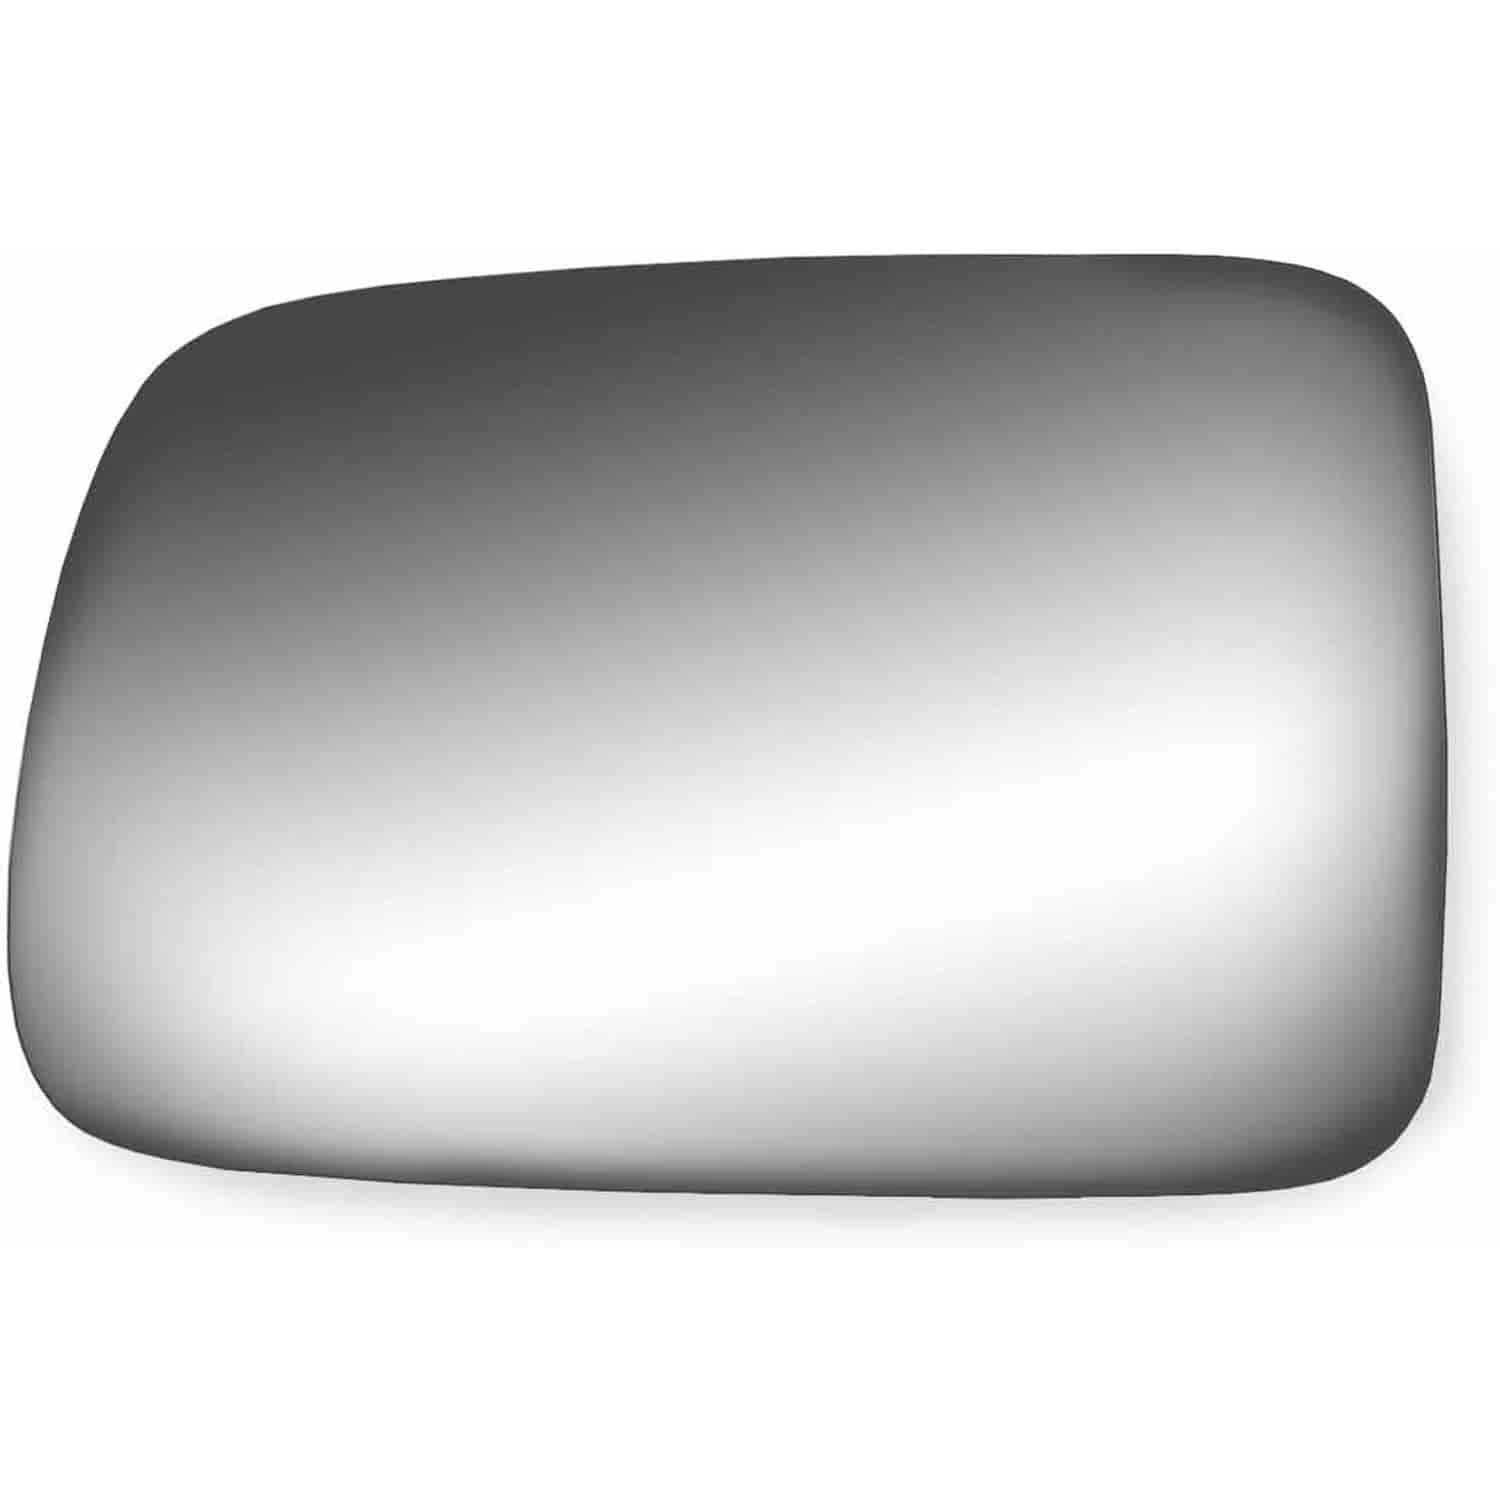 Replacement Glass for 02-06 CR-V the glass measures 4 11/16 tall by 7 15/16 wide and 7 5/8 diagonall